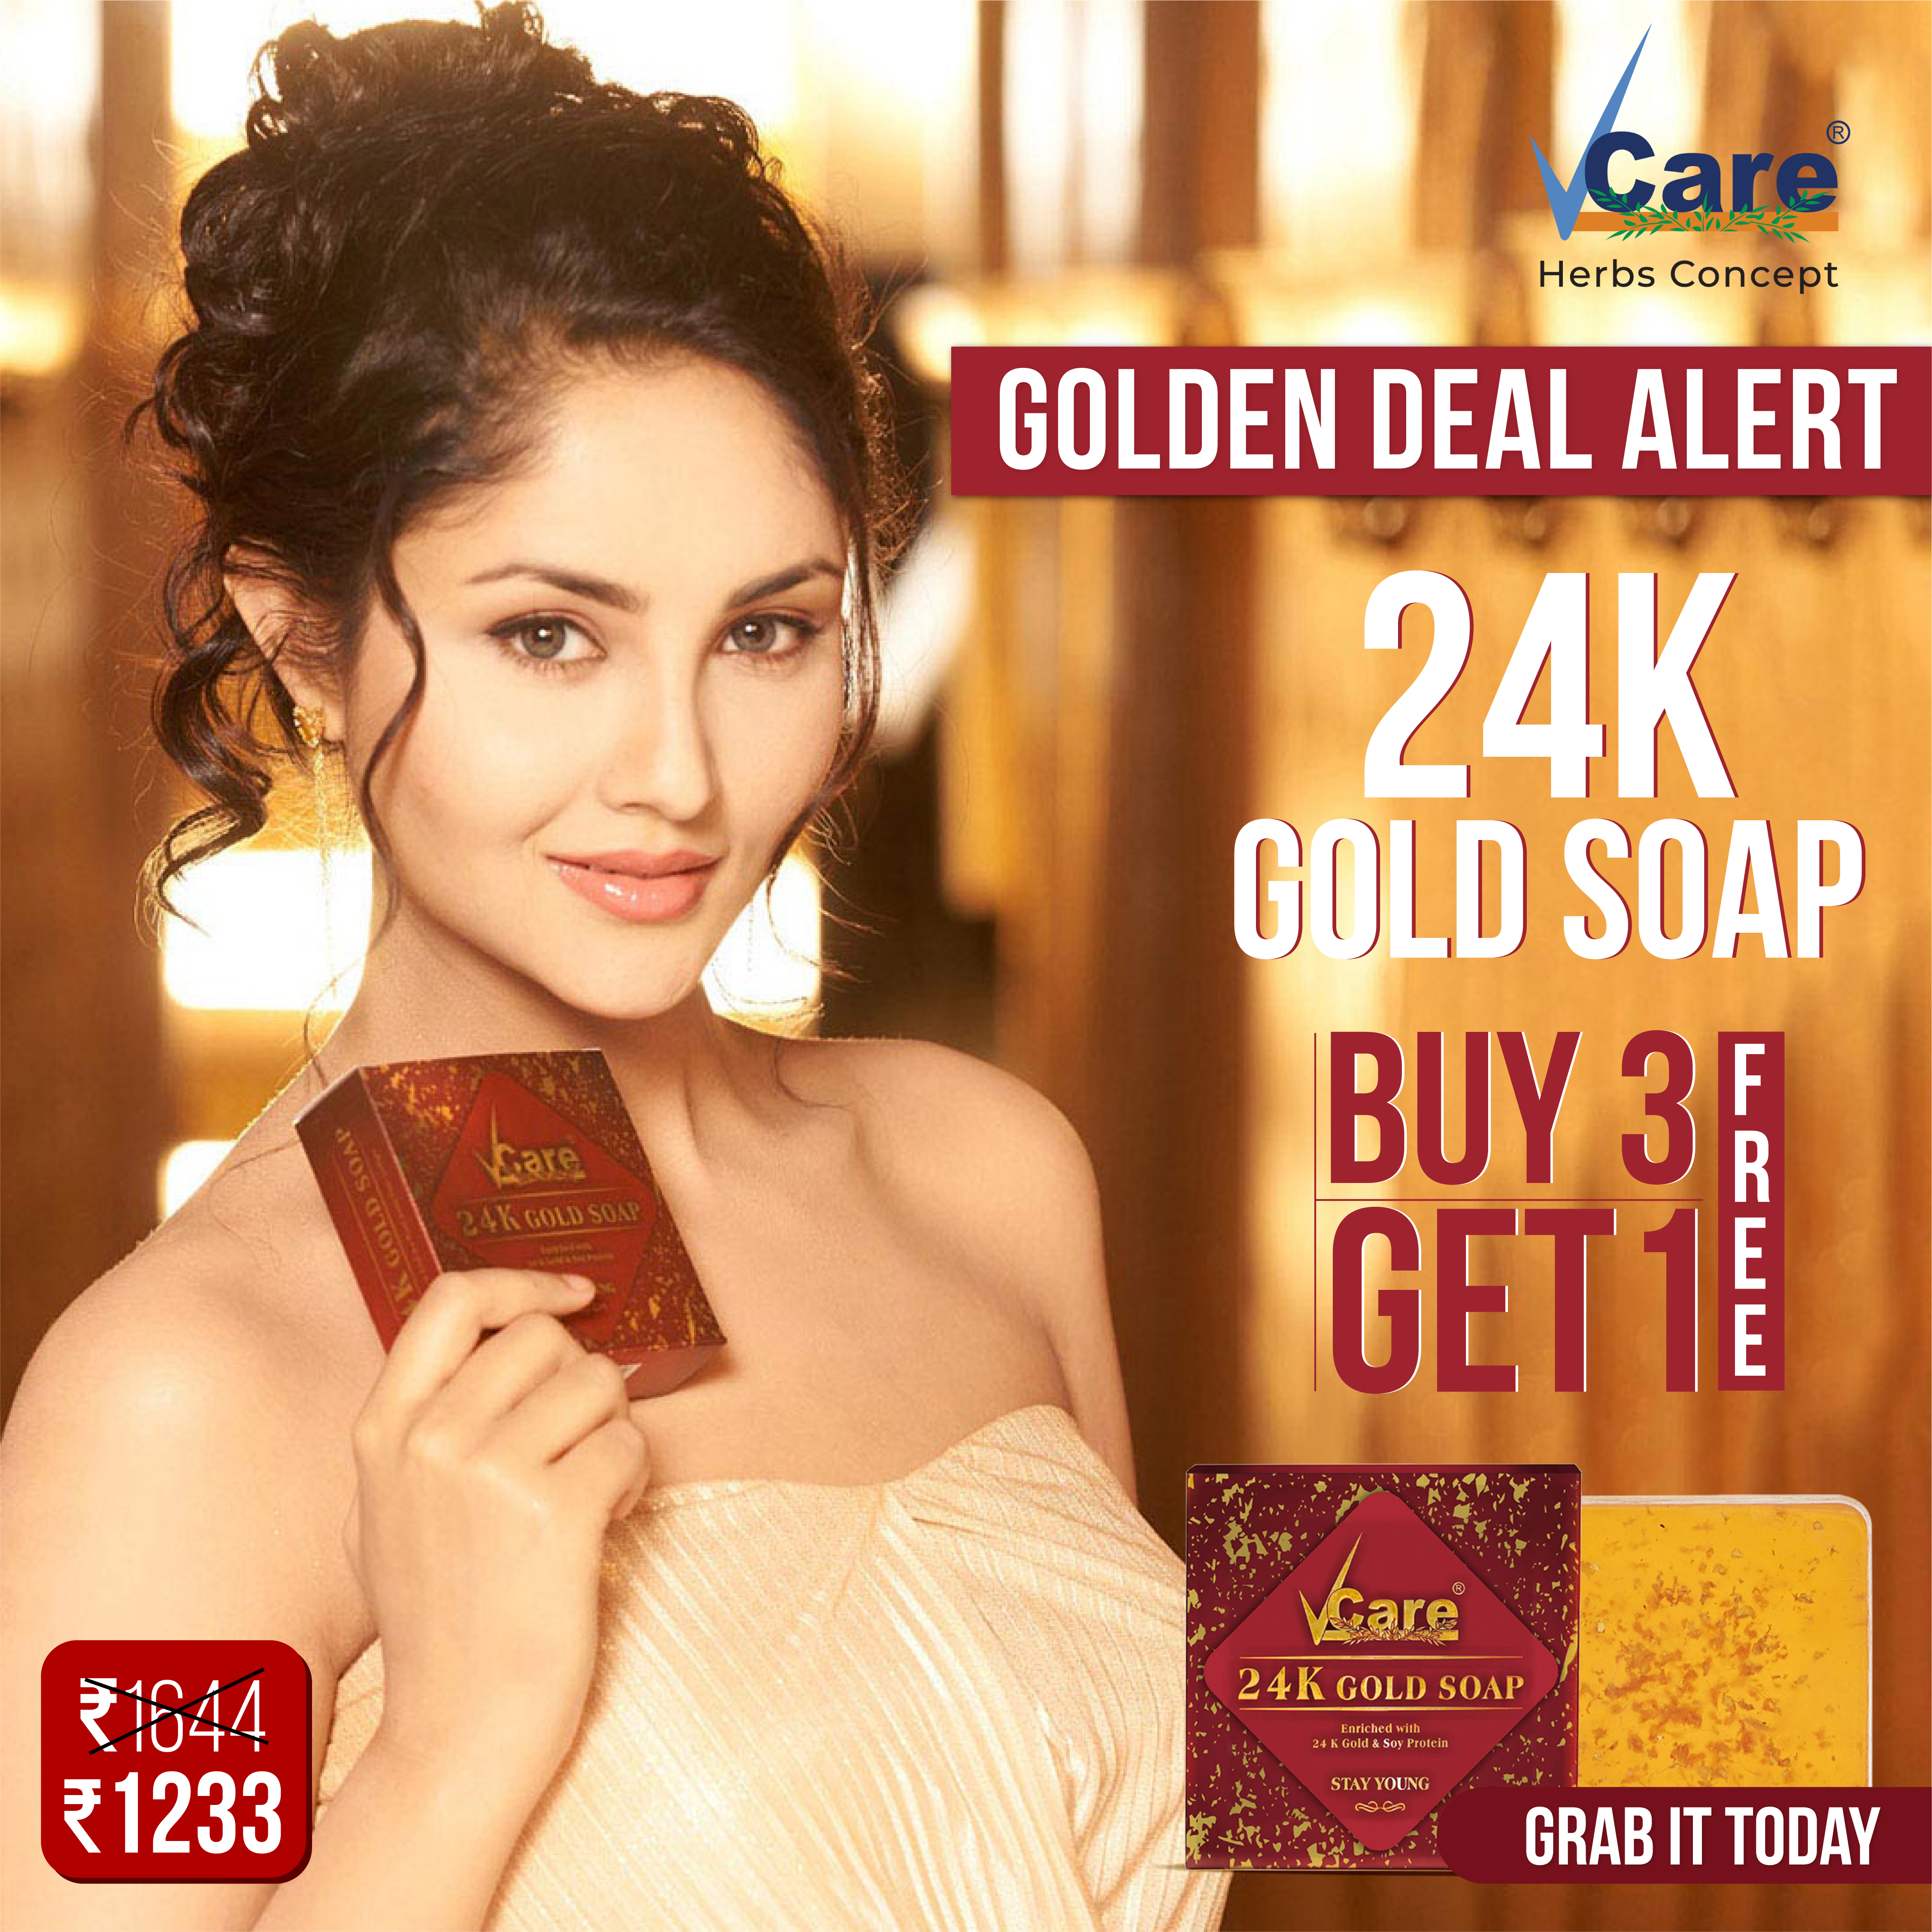 https://vcareproducts.com/storage/app/public/files/133/Webp products Images/Summer offer products/24k Gold Soap-01.jpg